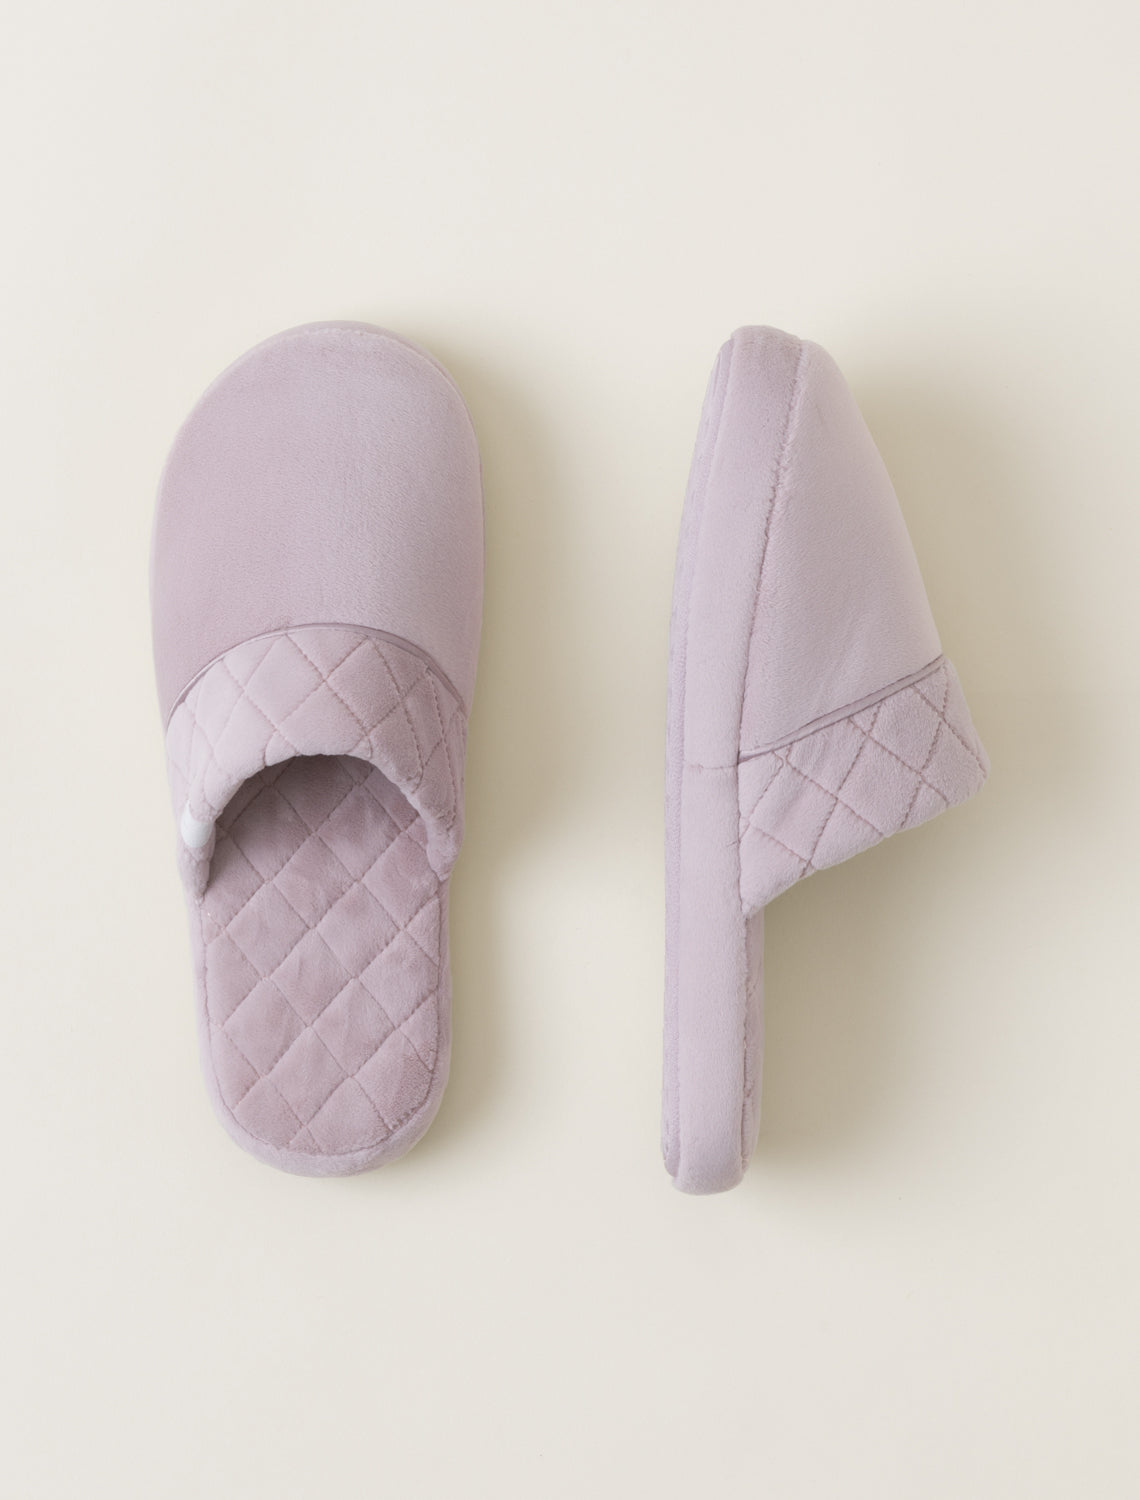 Luxe Chic Slippers